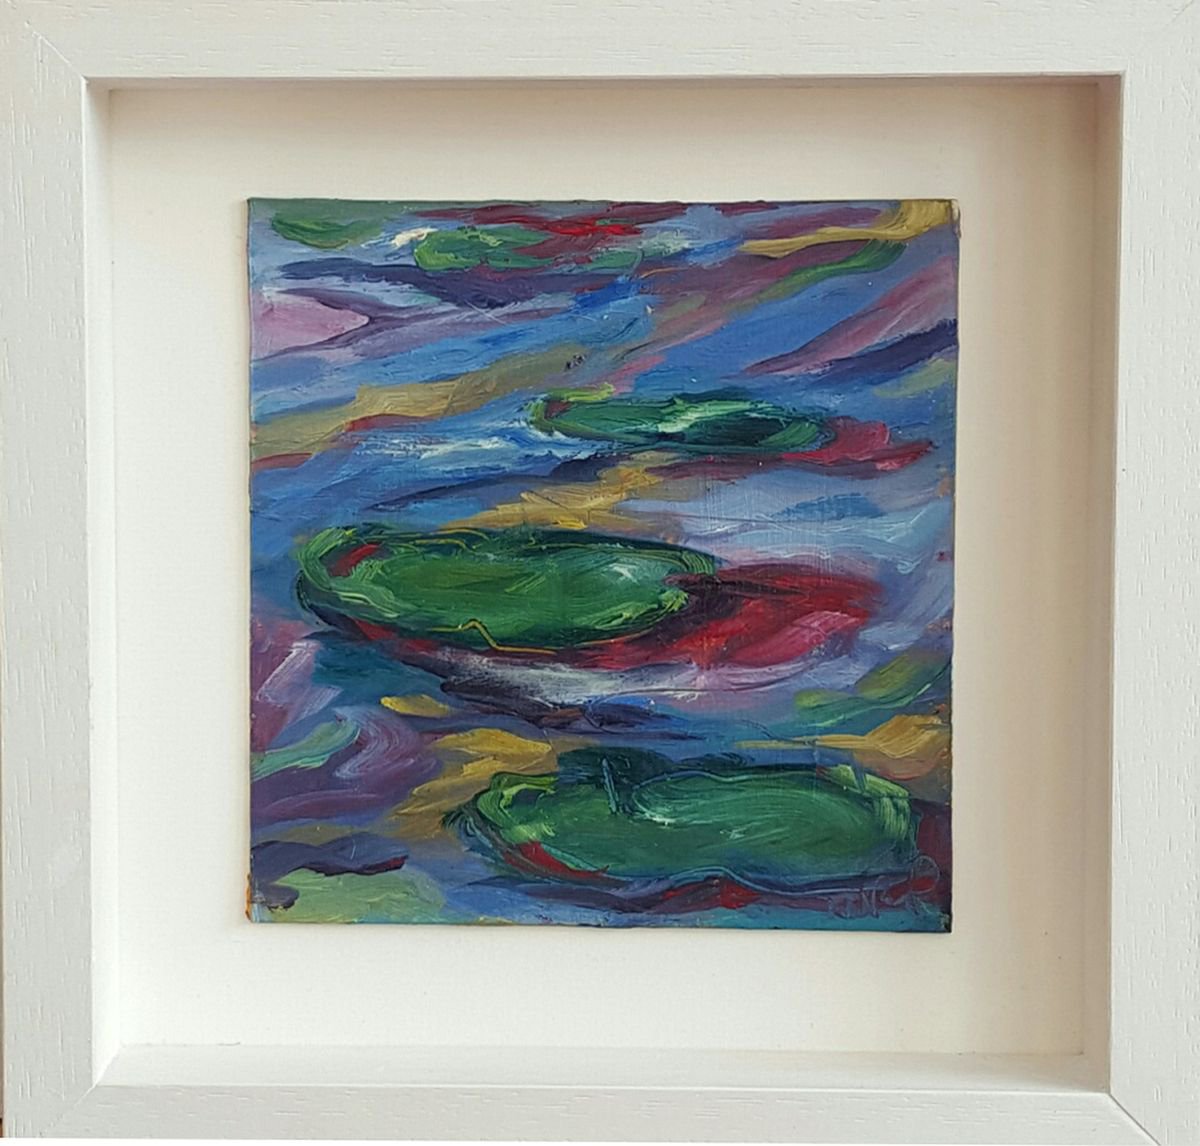 Water lily reflections on a summers day by Niki Purcell - Irish Landscape Painting